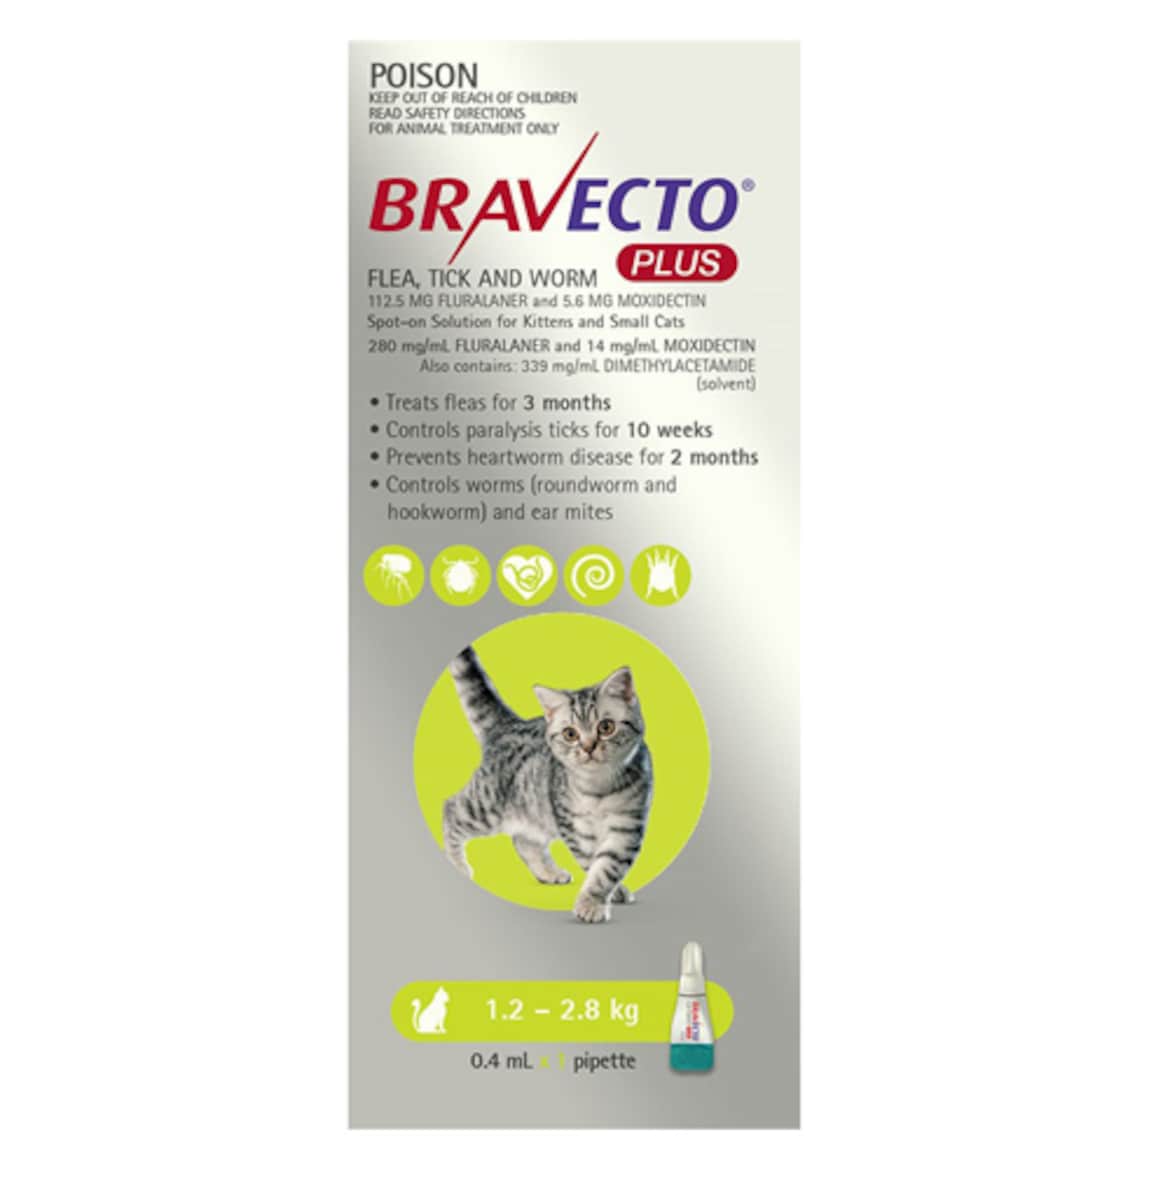 Bravecto Plus for Small Cats 1.2kg - 2.8kg (Green) 0.4ml Pipette